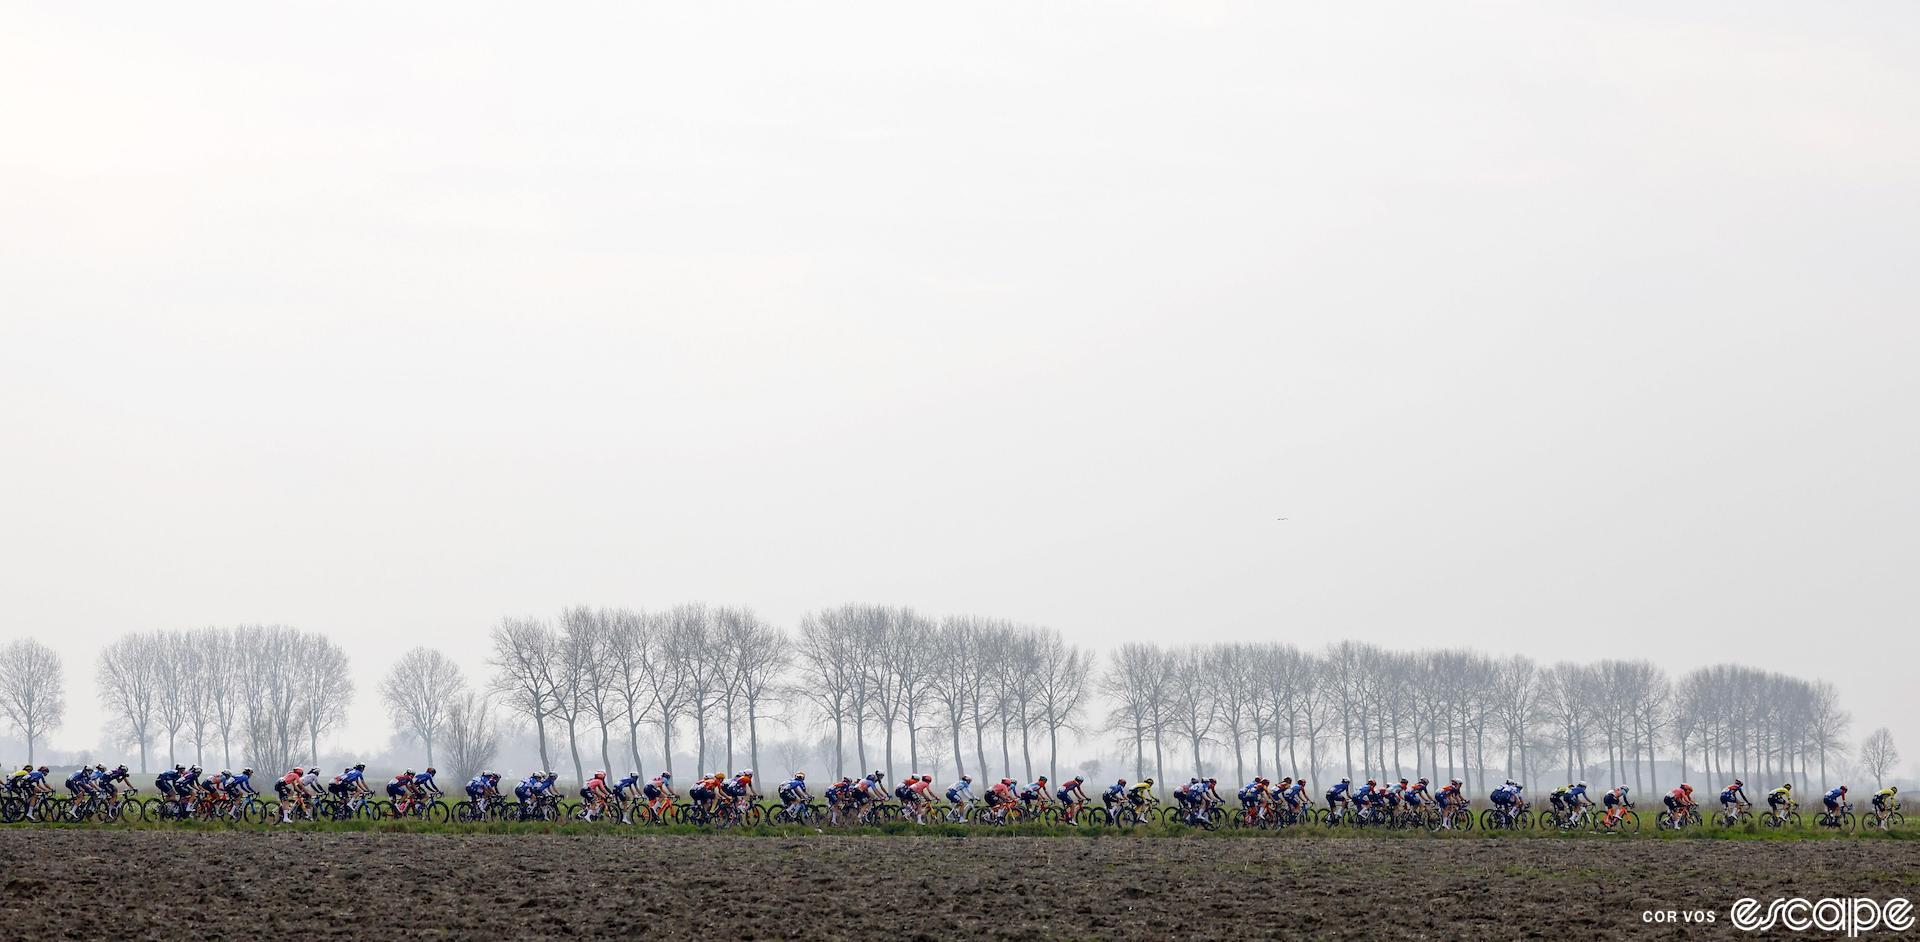 A long line of riders passes by a bank of leafless trees in Brugge-De Panne. The sky is a shadowy grey-white as mist burns off under a hazy sun.